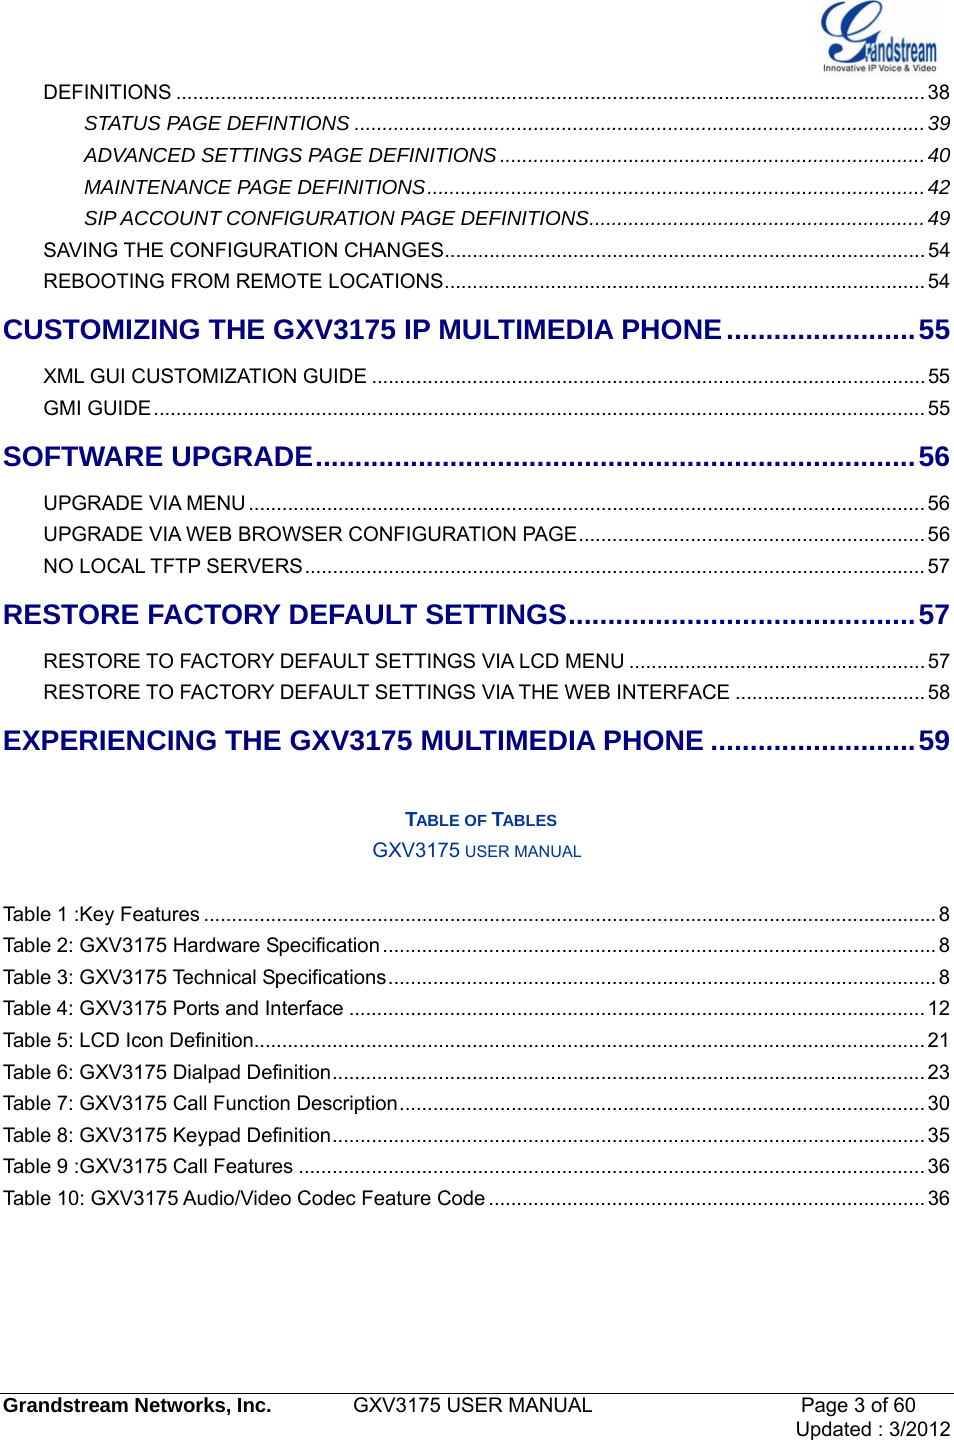   Grandstream Networks, Inc.        GXV3175 USER MANUAL                     Page 3 of 60                                 Updated : 3/2012  DEFINITIONS ...................................................................................................................................... 38STATUS PAGE DEFINTIONS ......................................................................................................39ADVANCED SETTINGS PAGE DEFINITIONS ............................................................................40MAINTENANCE PAGE DEFINITIONS.........................................................................................42SIP ACCOUNT CONFIGURATION PAGE DEFINITIONS............................................................49SAVING THE CONFIGURATION CHANGES......................................................................................54REBOOTING FROM REMOTE LOCATIONS......................................................................................54CUSTOMIZING THE GXV3175 IP MULTIMEDIA PHONE........................55 XML GUI CUSTOMIZATION GUIDE ...................................................................................................55 GMI GUIDE..........................................................................................................................................55 SOFTWARE UPGRADE............................................................................56UPGRADE VIA MENU ......................................................................................................................... 56UPGRADE VIA WEB BROWSER CONFIGURATION PAGE..............................................................56NO LOCAL TFTP SERVERS............................................................................................................... 57RESTORE FACTORY DEFAULT SETTINGS............................................57RESTORE TO FACTORY DEFAULT SETTINGS VIA LCD MENU .....................................................57RESTORE TO FACTORY DEFAULT SETTINGS VIA THE WEB INTERFACE ..................................58EXPERIENCING THE GXV3175 MULTIMEDIA PHONE ..........................59  TABLE OF TABLES GXV3175 USER MANUAL  Table 1 :Key Features ................................................................................................................................... 8Table 2: GXV3175 Hardware Specification................................................................................................... 8Table 3: GXV3175 Technical Specifications.................................................................................................. 8Table 4: GXV3175 Ports and Interface ....................................................................................................... 12Table 5: LCD Icon Definition........................................................................................................................ 21Table 6: GXV3175 Dialpad Definition.......................................................................................................... 23Table 7: GXV3175 Call Function Description.............................................................................................. 30 Table 8: GXV3175 Keypad Definition.......................................................................................................... 35Table 9 :GXV3175 Call Features ................................................................................................................ 36Table 10: GXV3175 Audio/Video Codec Feature Code ..............................................................................36     